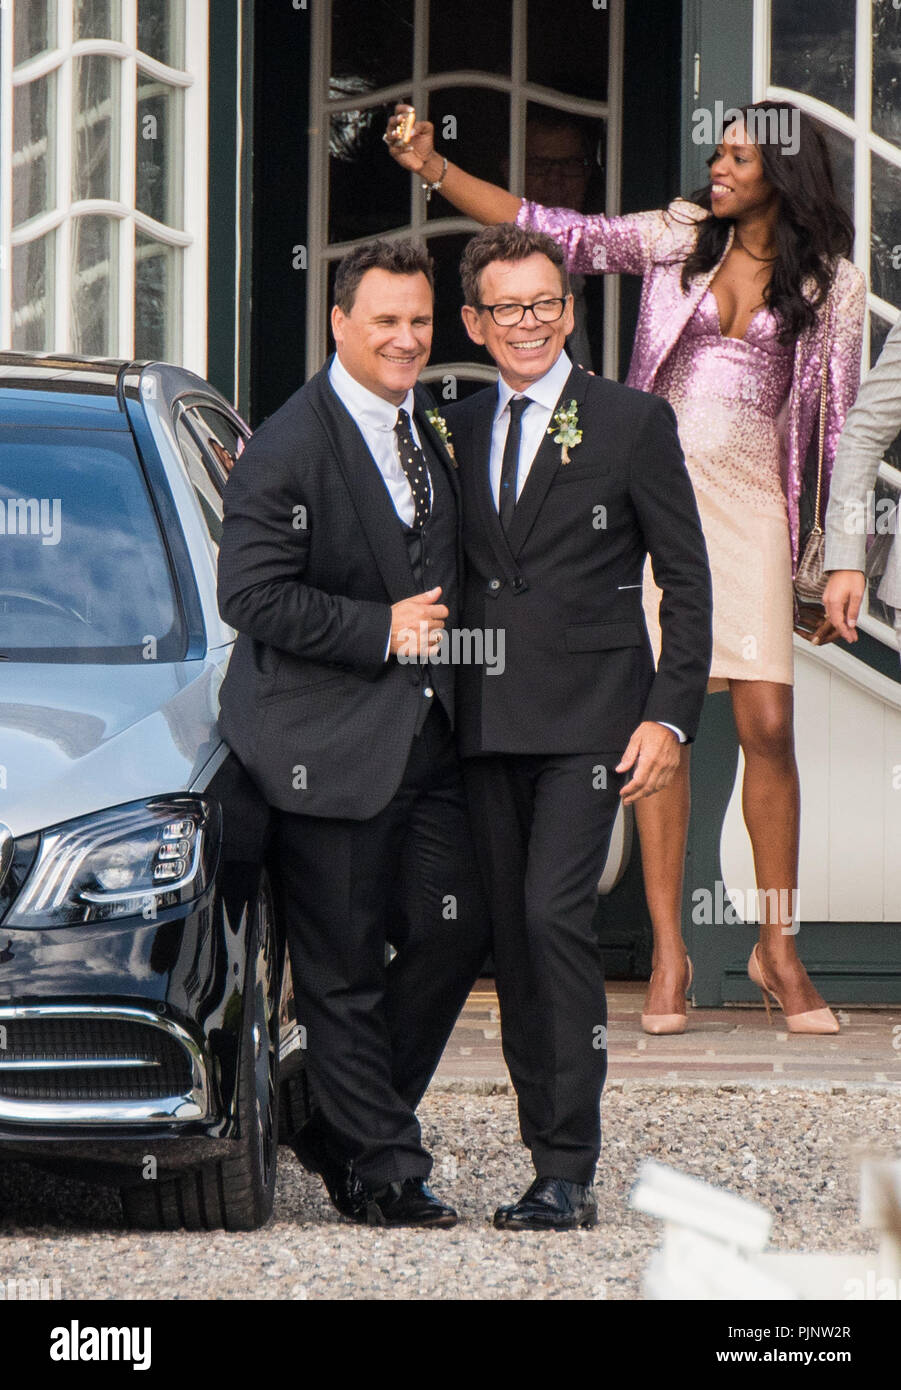 RECROP Sylt, Germany. 8th September 2018.  Guido Maria Kretschmer (L), fashion designer, and his husband Frank Mutters stand together during a reception after their wedding. Photo: Daniel Bockwoldt/dpa Credit: dpa picture alliance/Alamy Live News Stock Photo